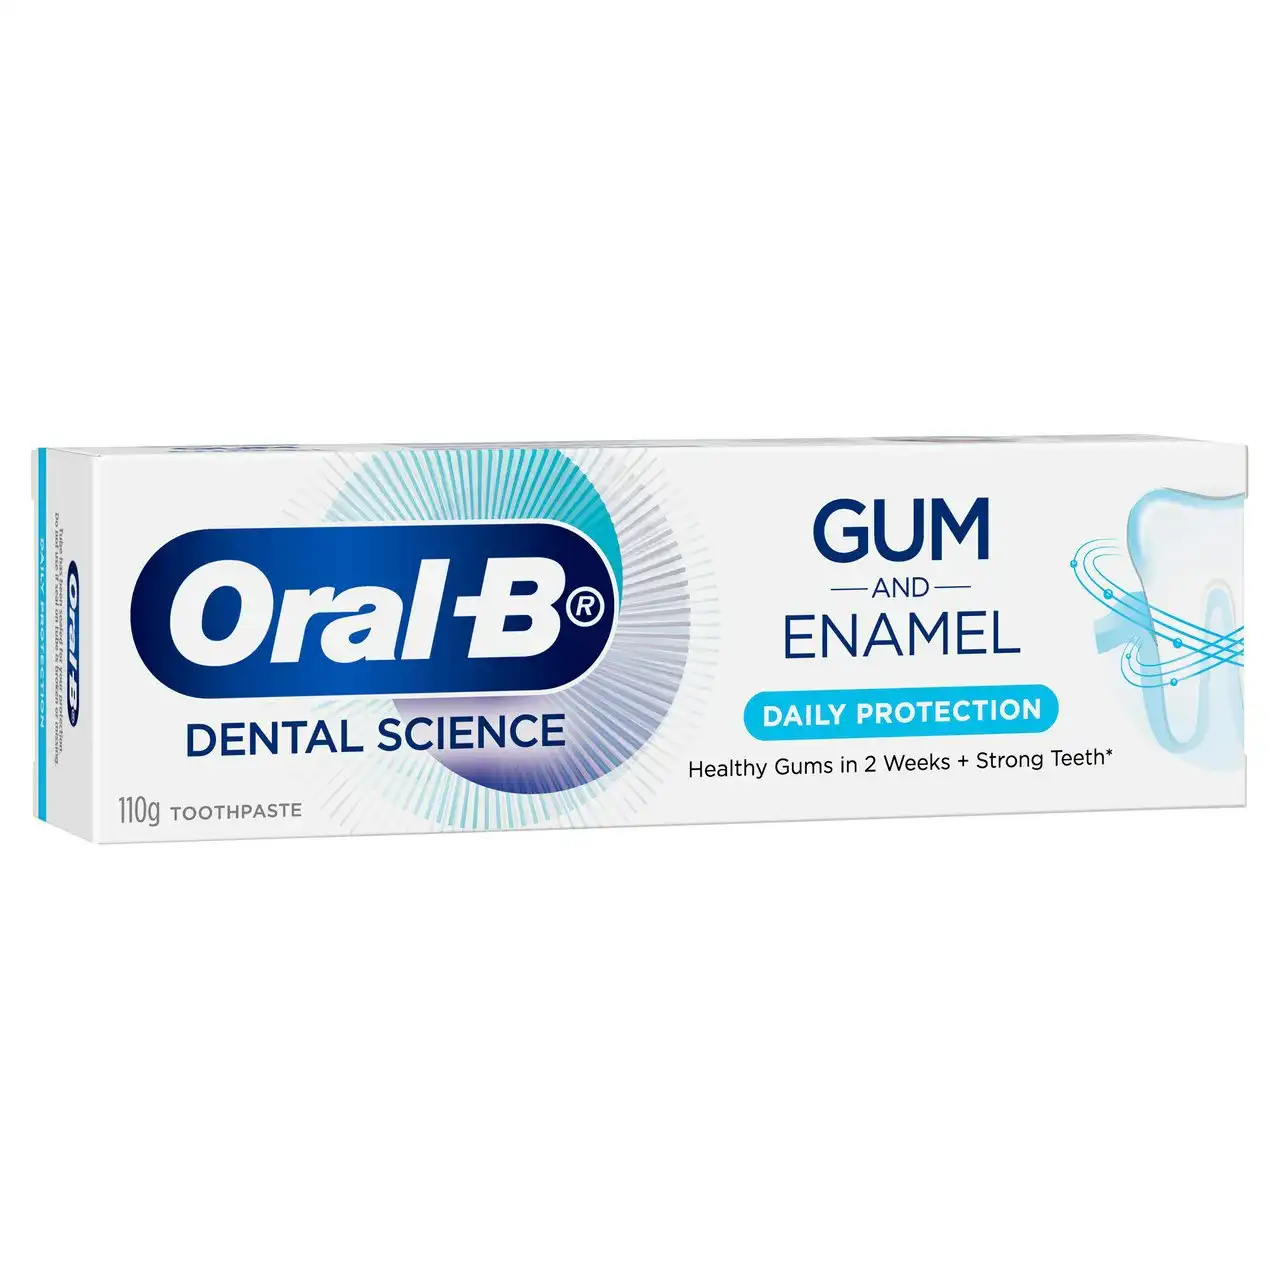 Oral-B Gum & Enamel Daily Protection Sensitive Mint Toothpaste 110g